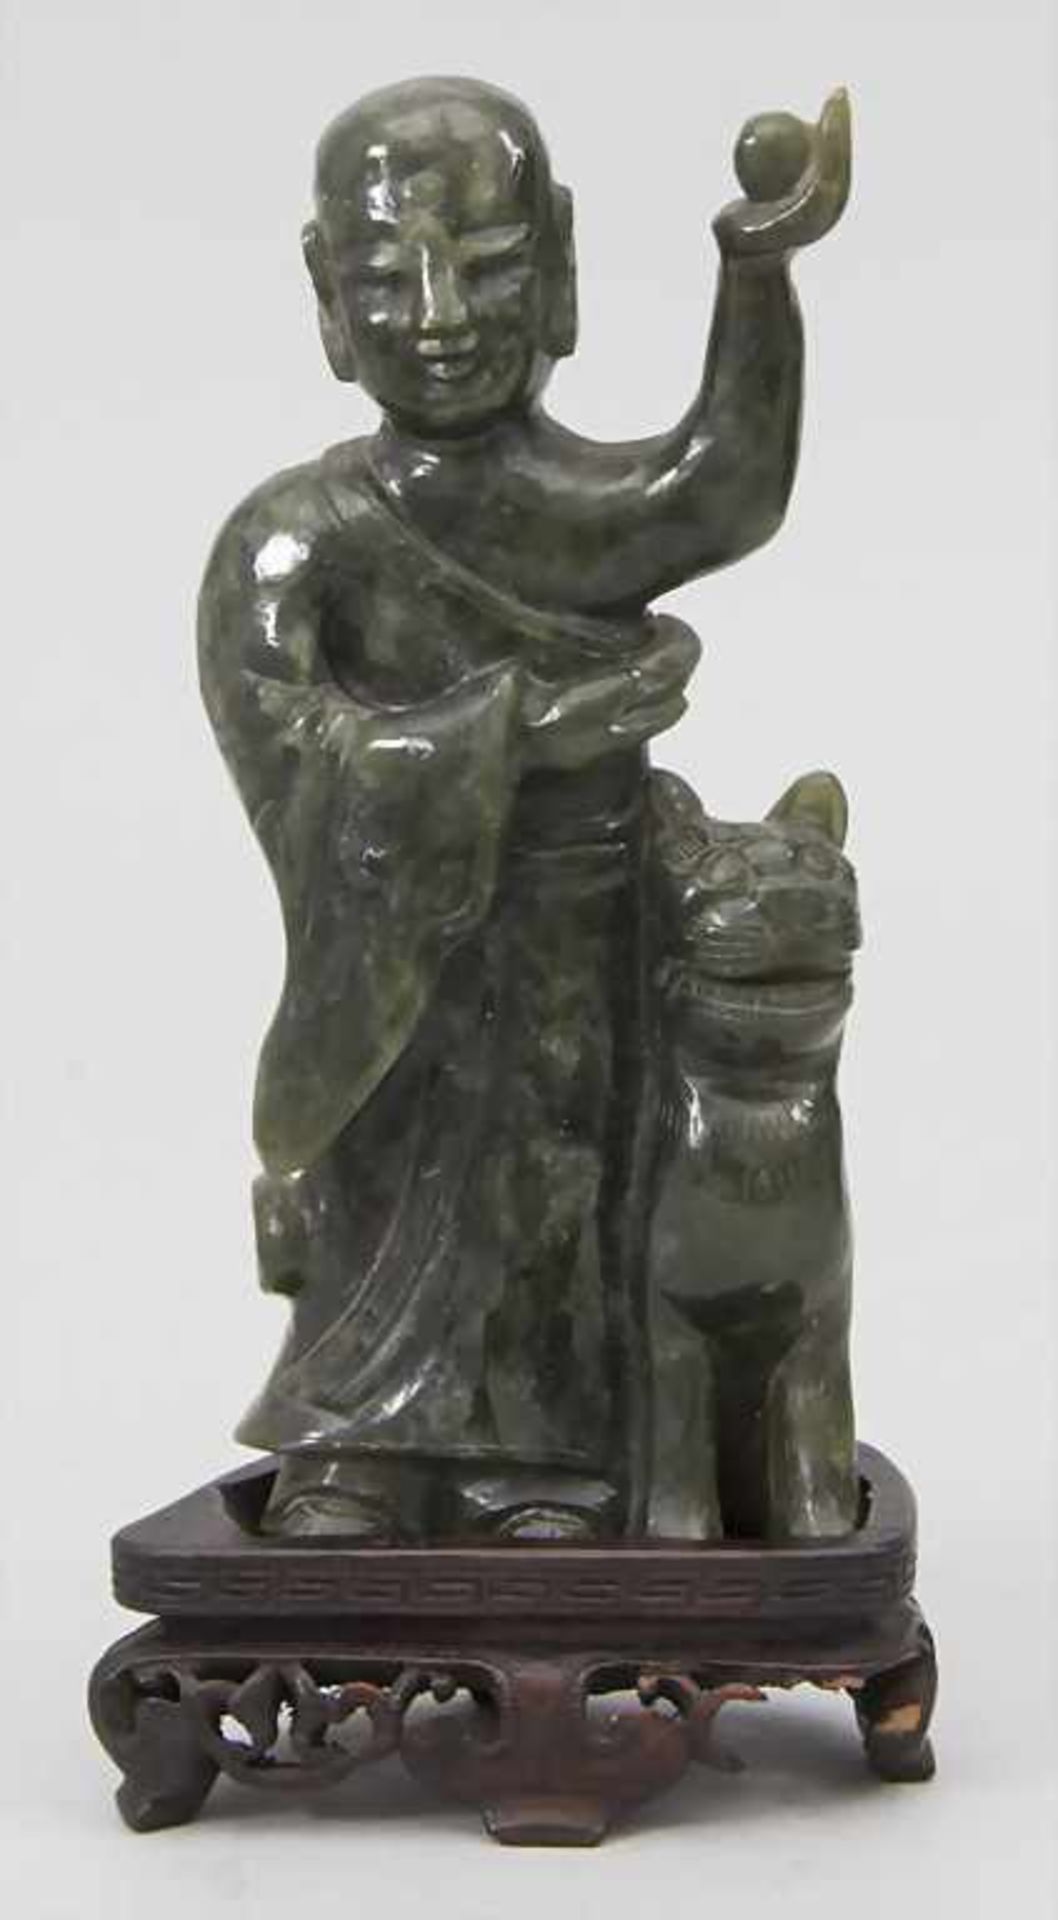 Mönch mit Tiger / A monk with a tiger, China, Qing-Dynastie (1644-1911), wohl 18./19. Jh.